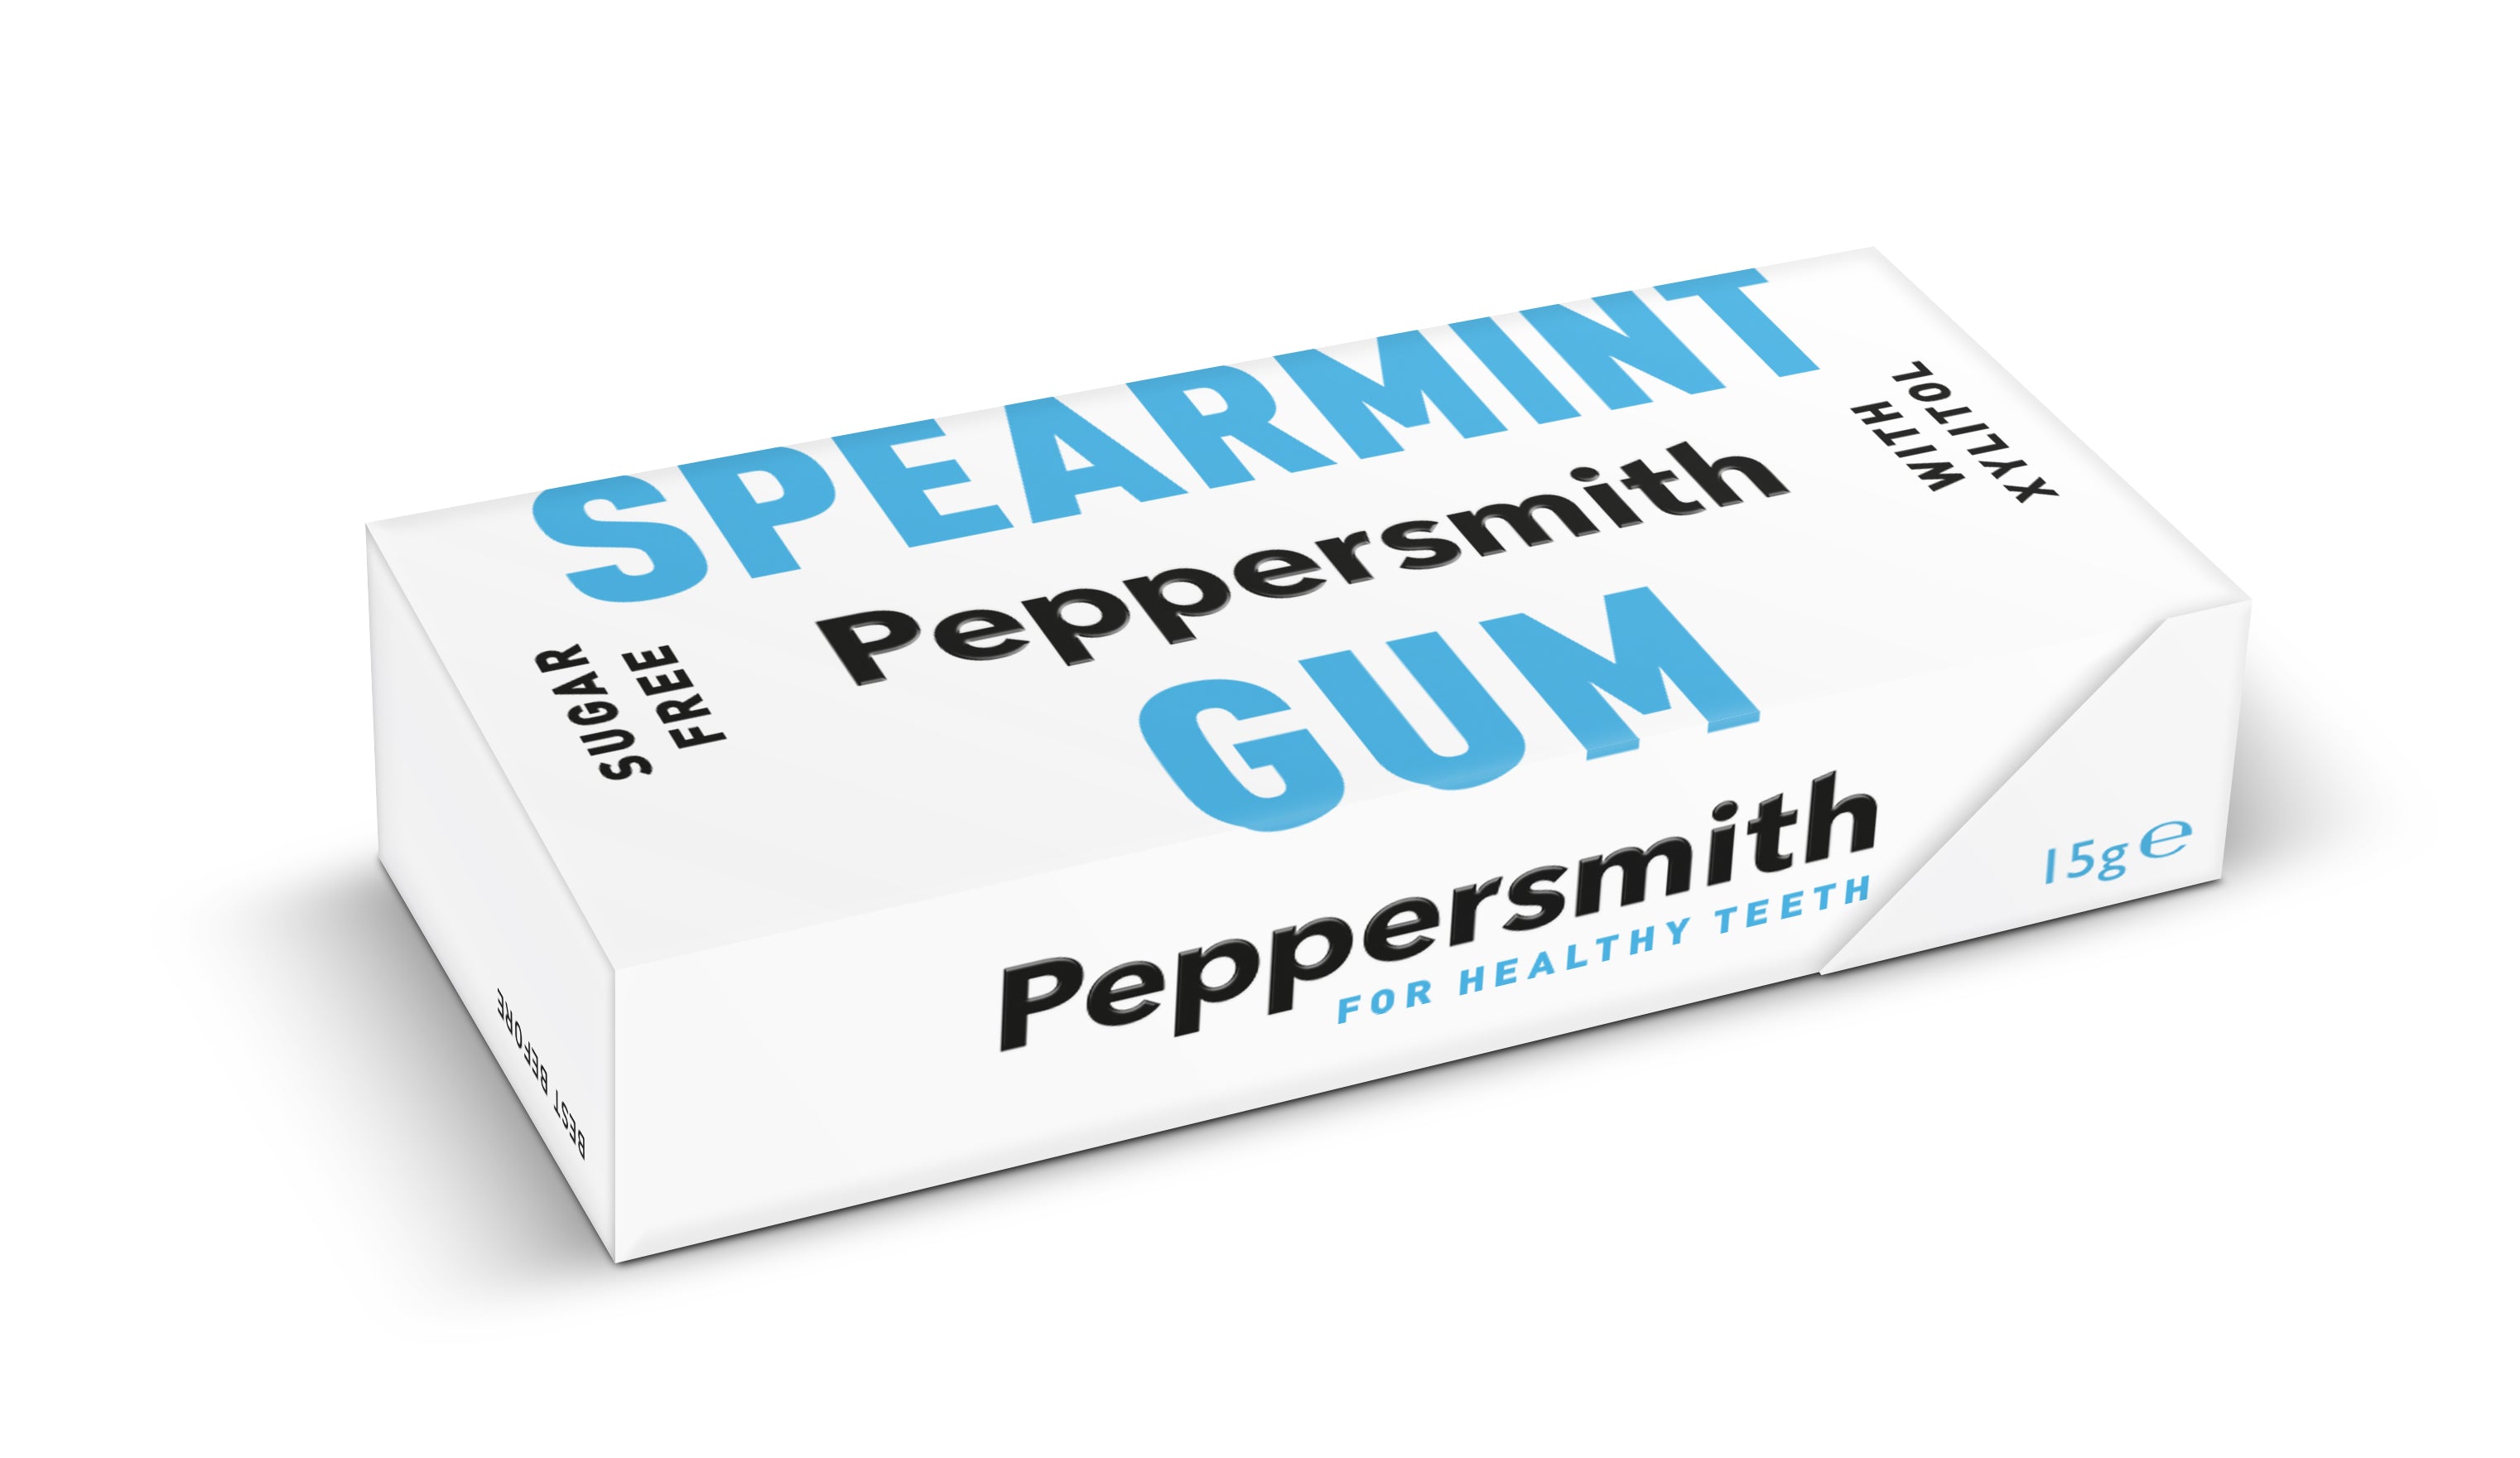 Peppersmith - Spearmint Gum // Stores Supply // PEPPERSMITHS